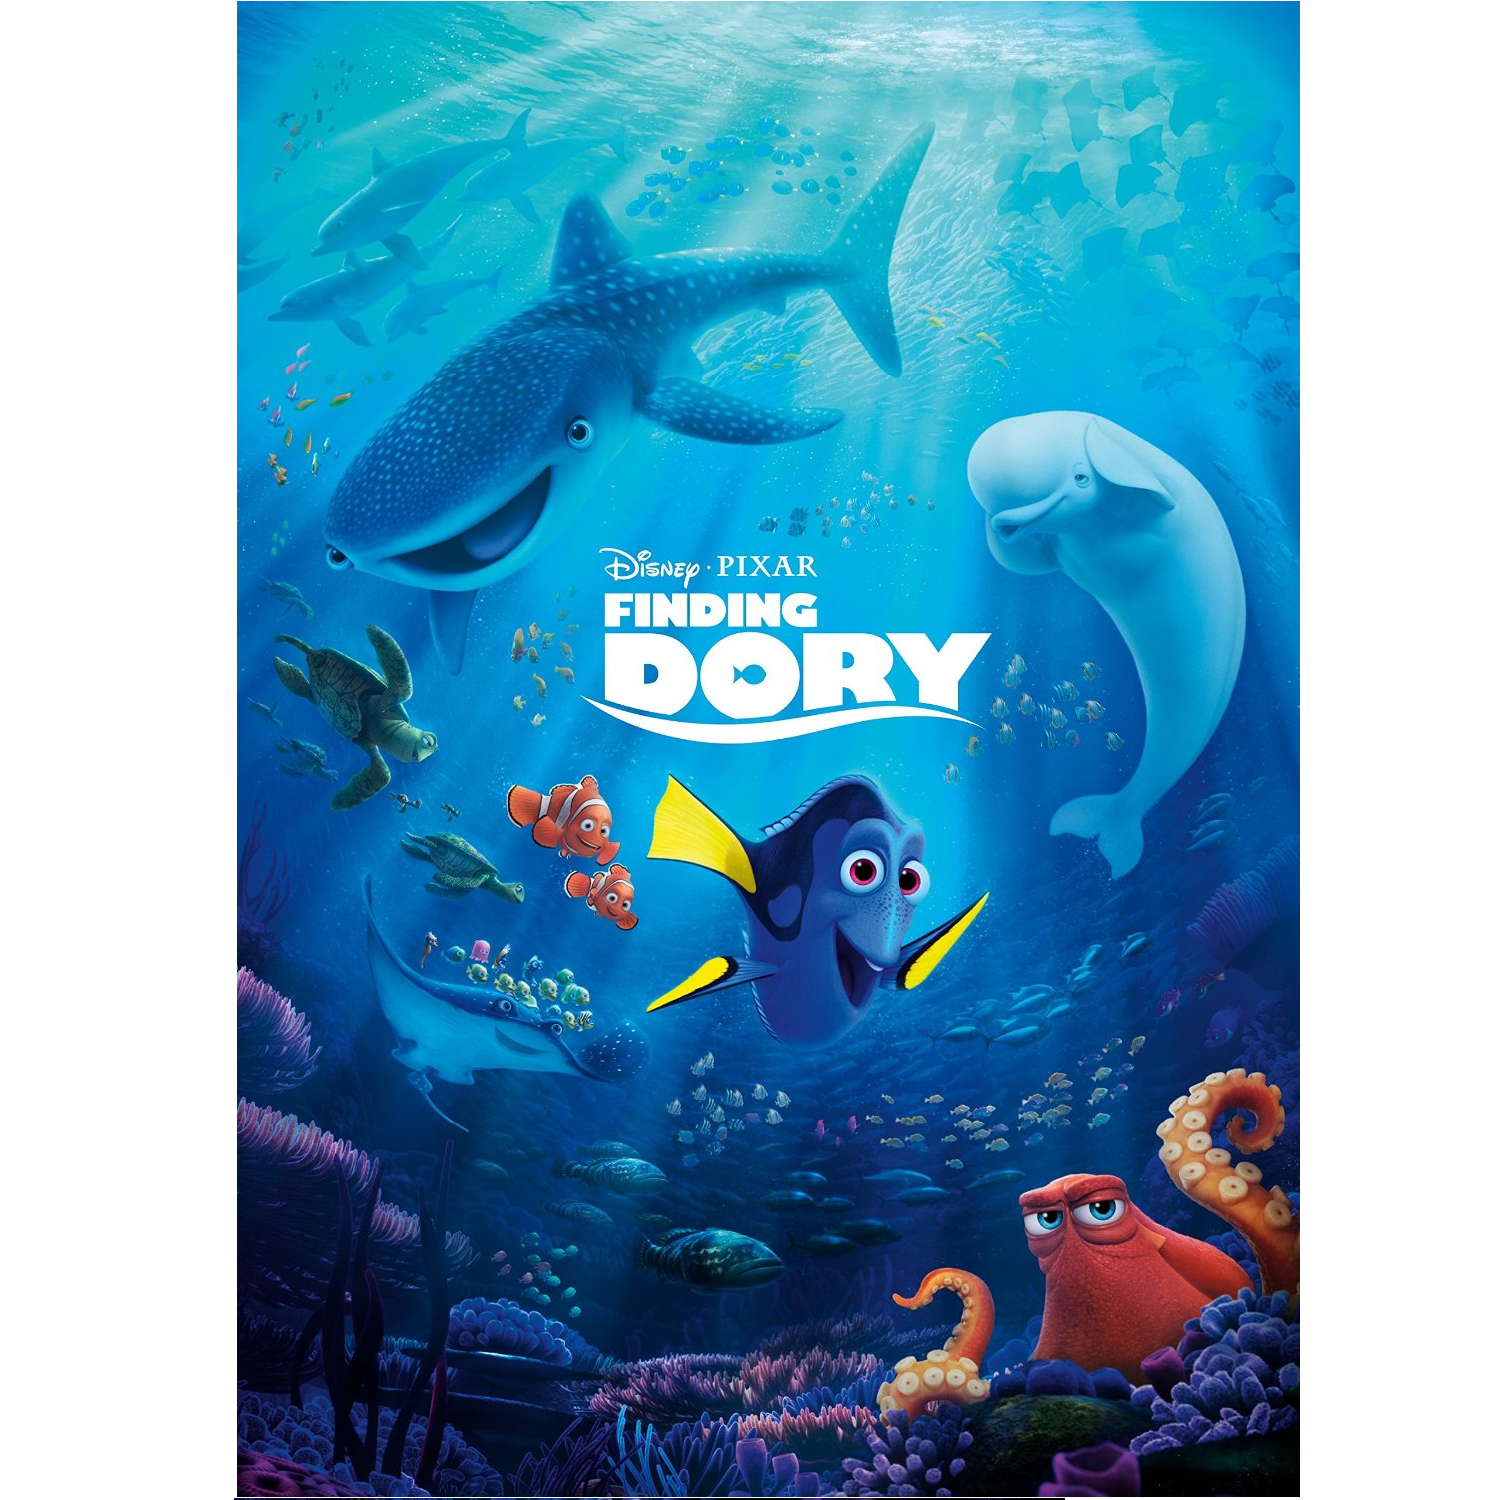 BEST Prices for Finding Dory Now Available to Pre-Order on Blu-ray & DVD!